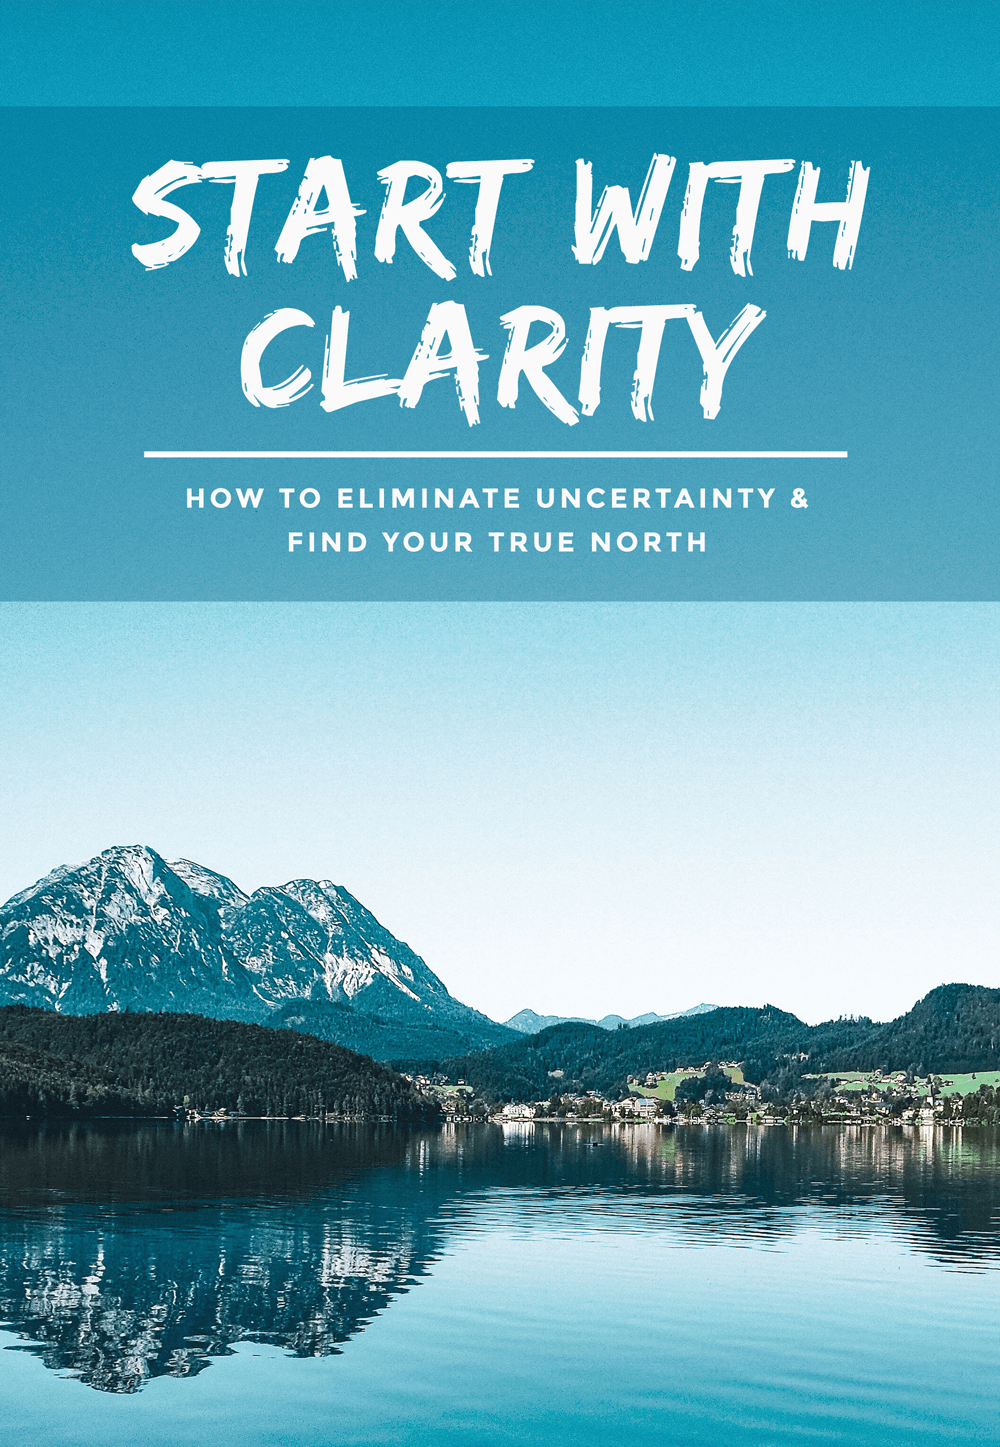 License - Start with Clarity